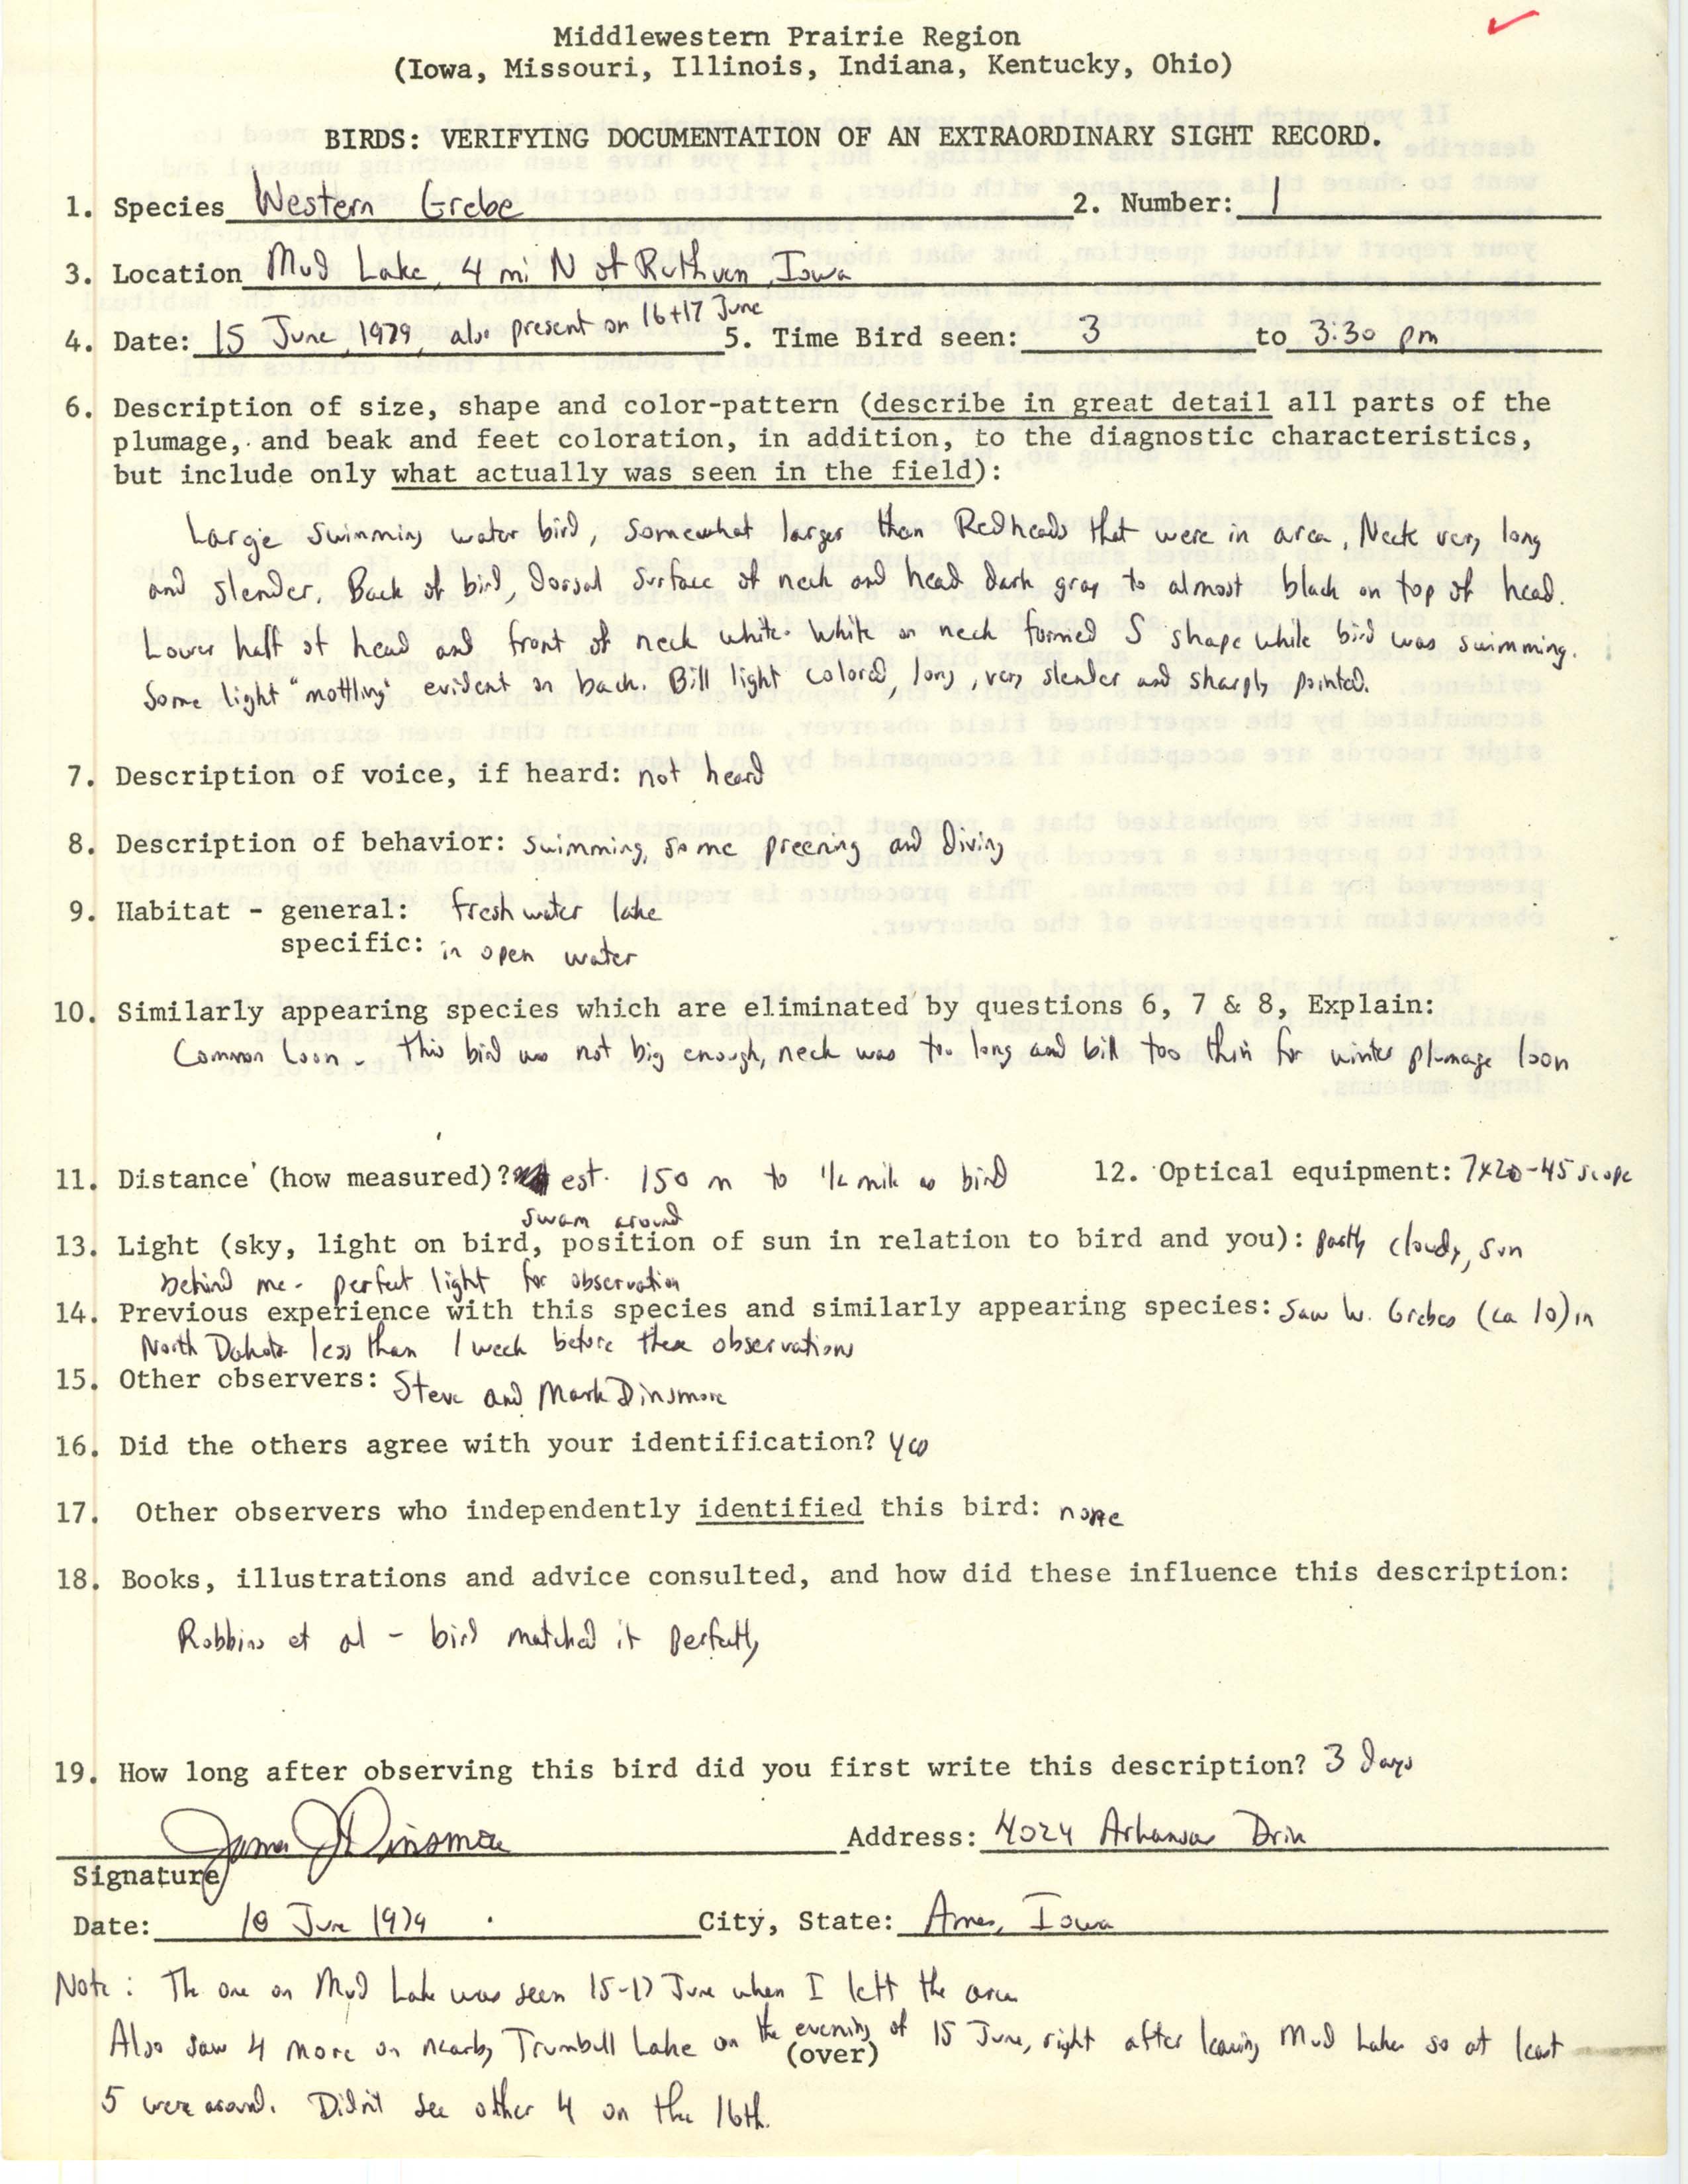 Rare bird documentation form for Western Grebe at Ruthven, 1979